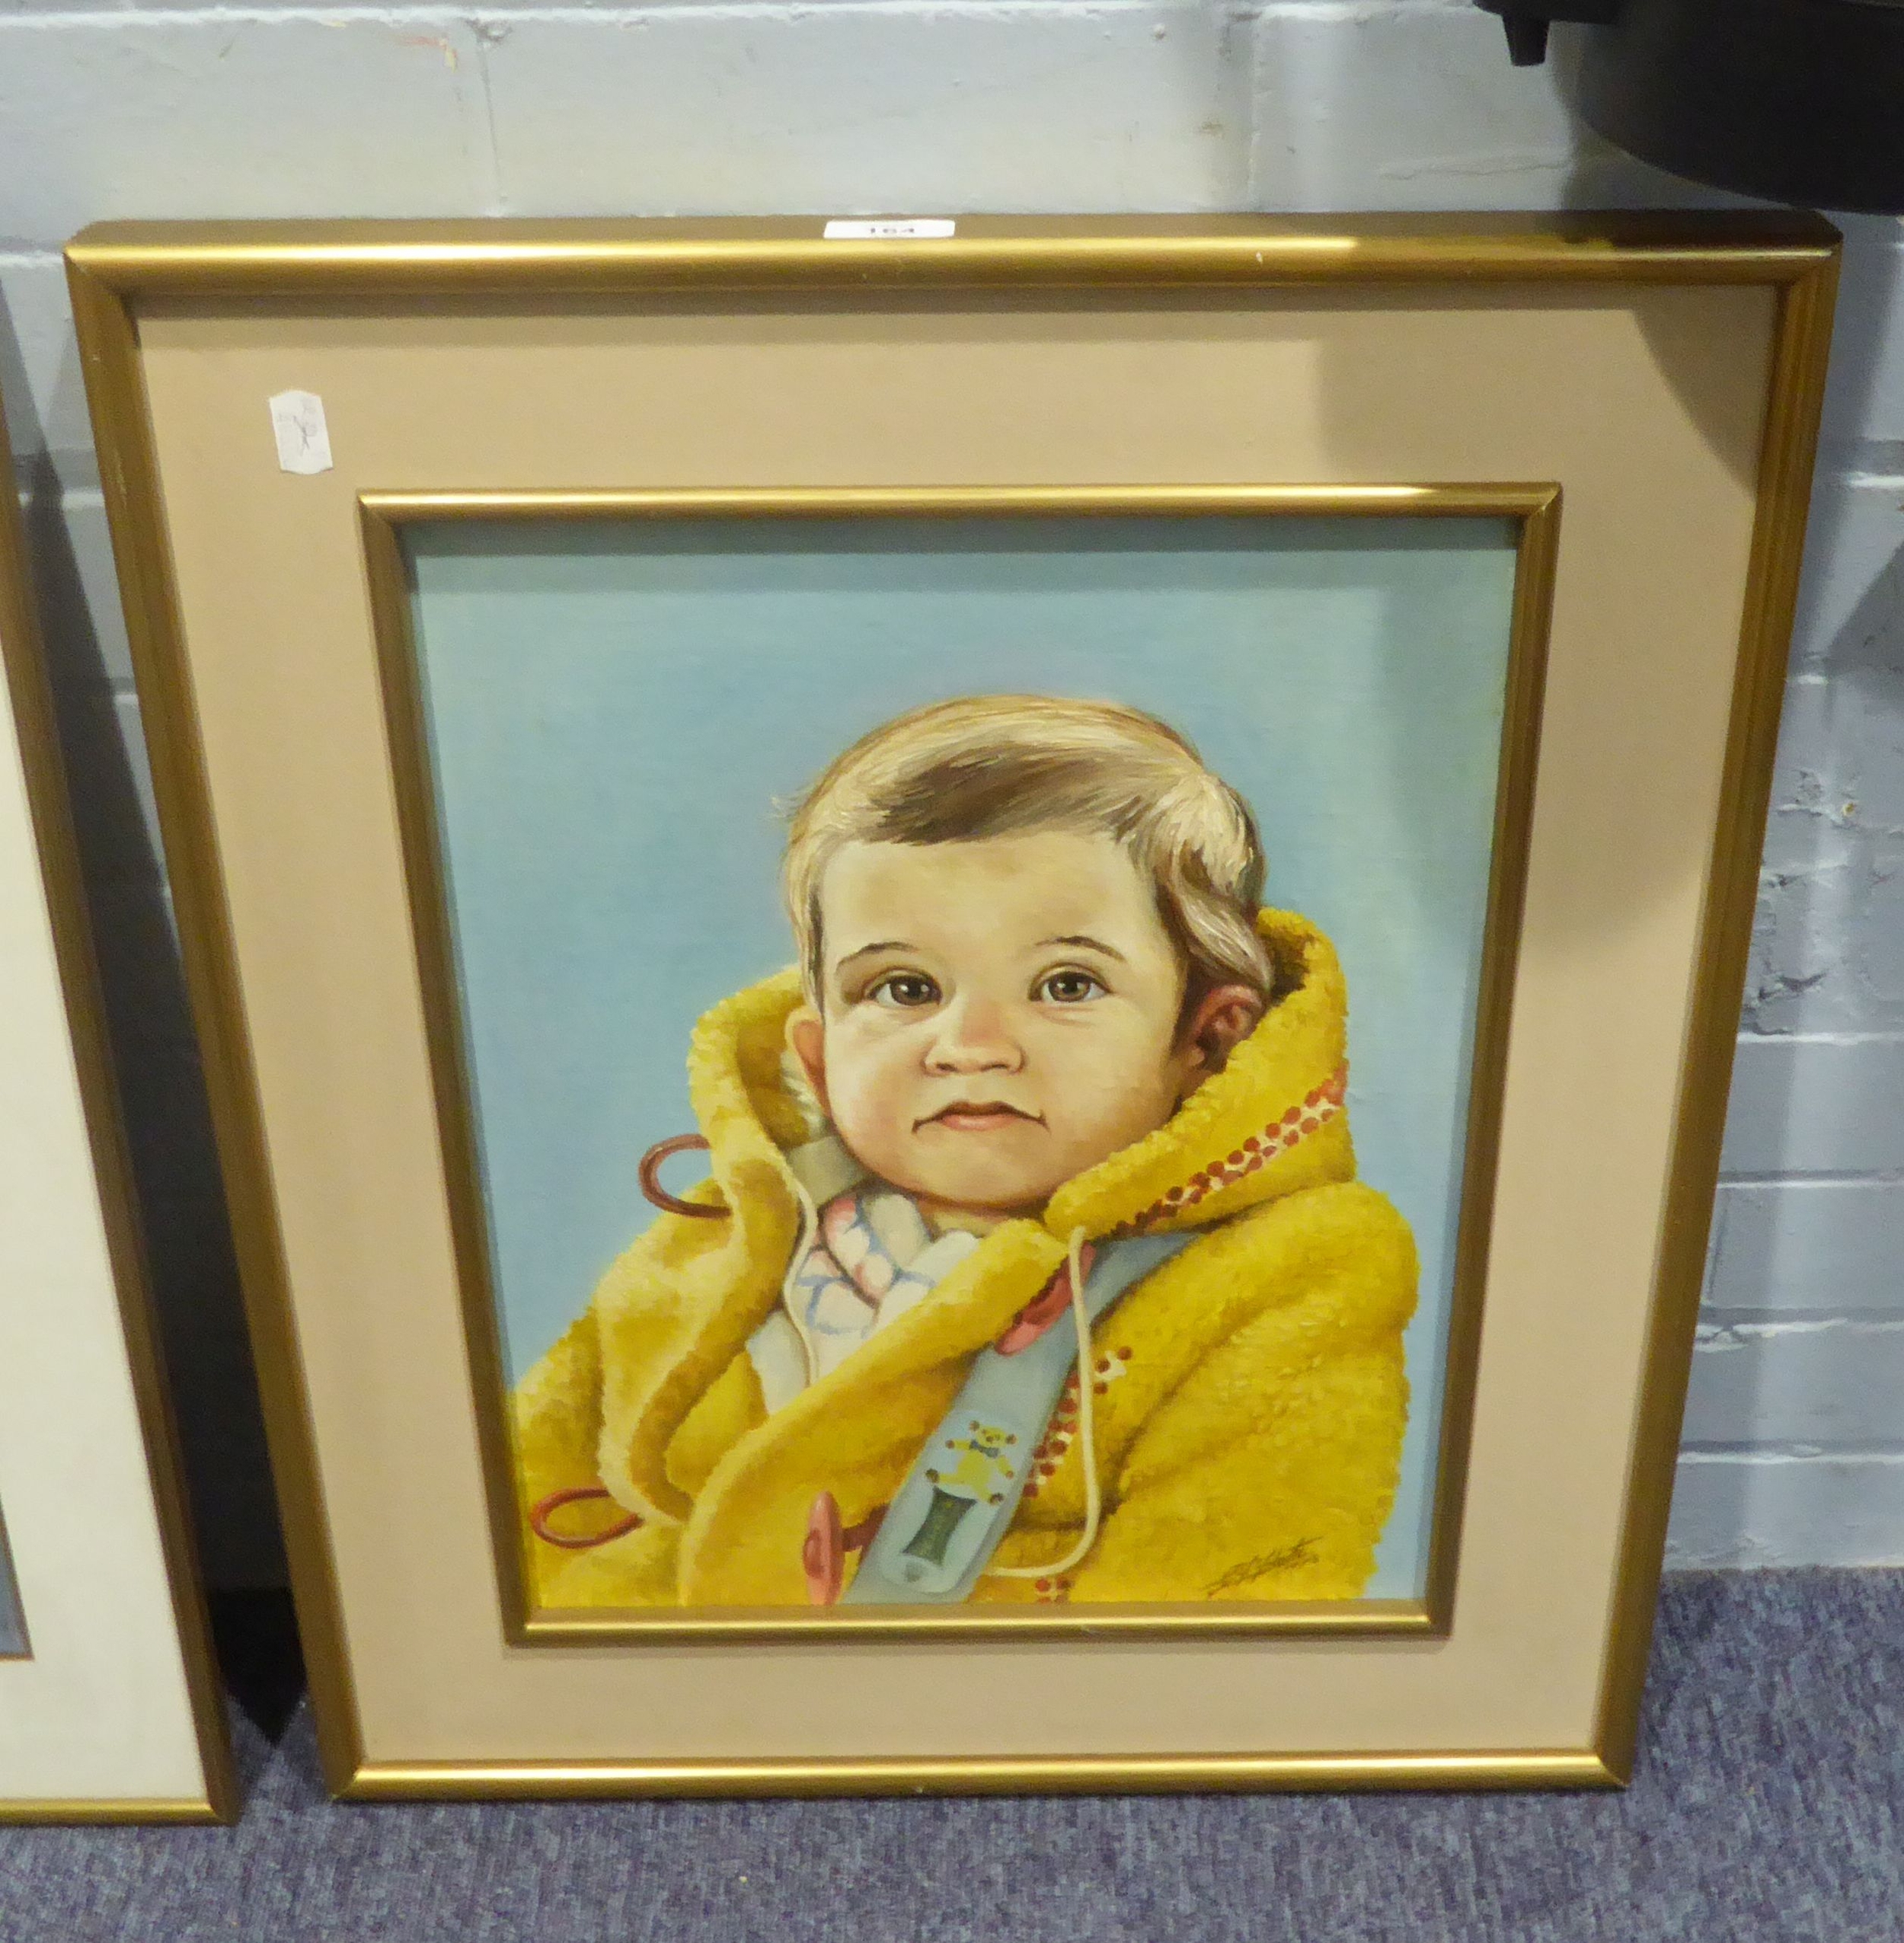 G.F. FELGATE (TWENTIETH CENTURY) ACRYLIC ON BOARD 'YOUNG CHILD IN YELLOW ROMPER SUIT) SIGNED LOWER